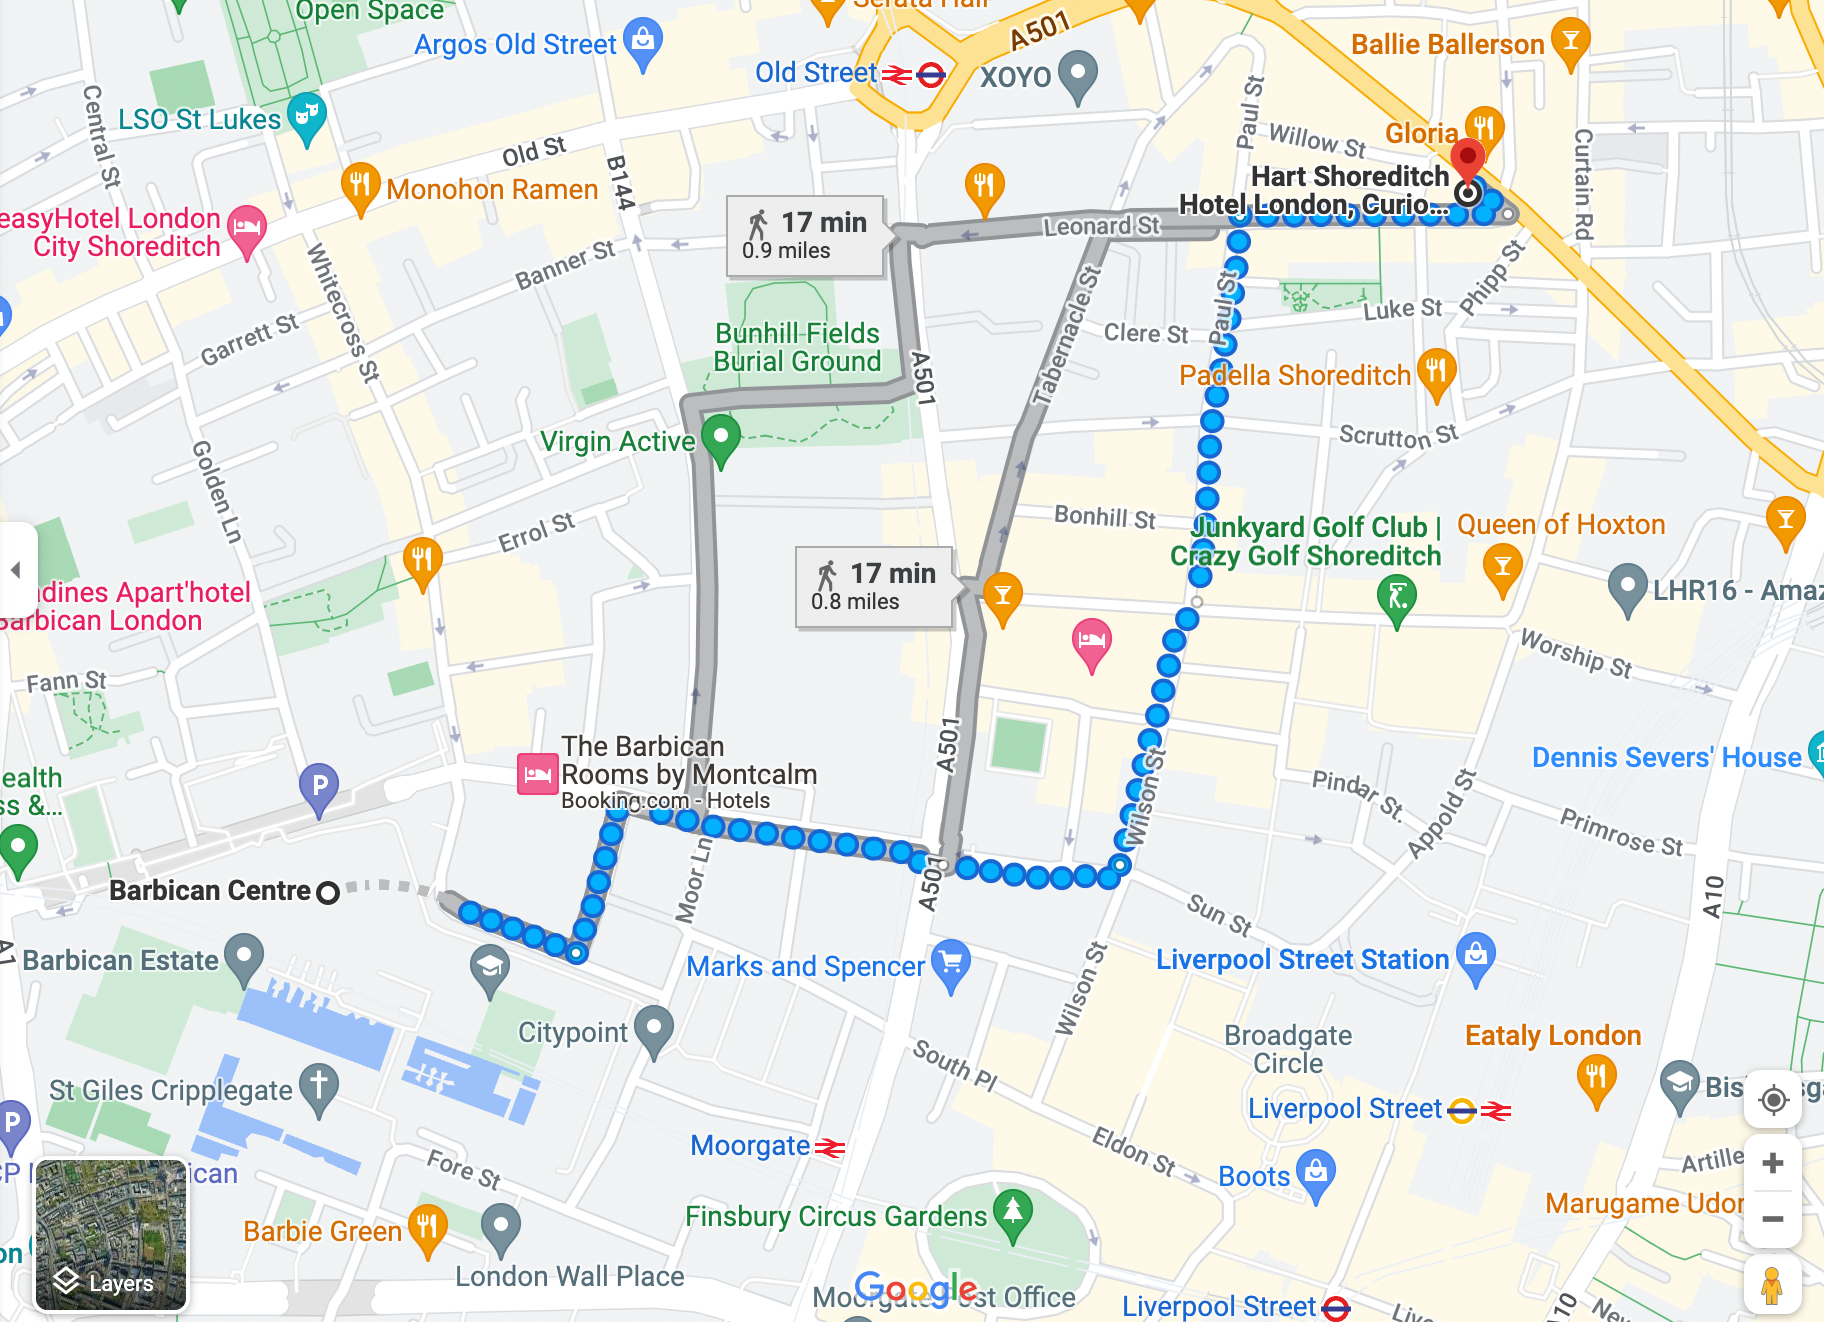 Google maps directions from Barbican Centre to Hart Shoreditch Hotel London